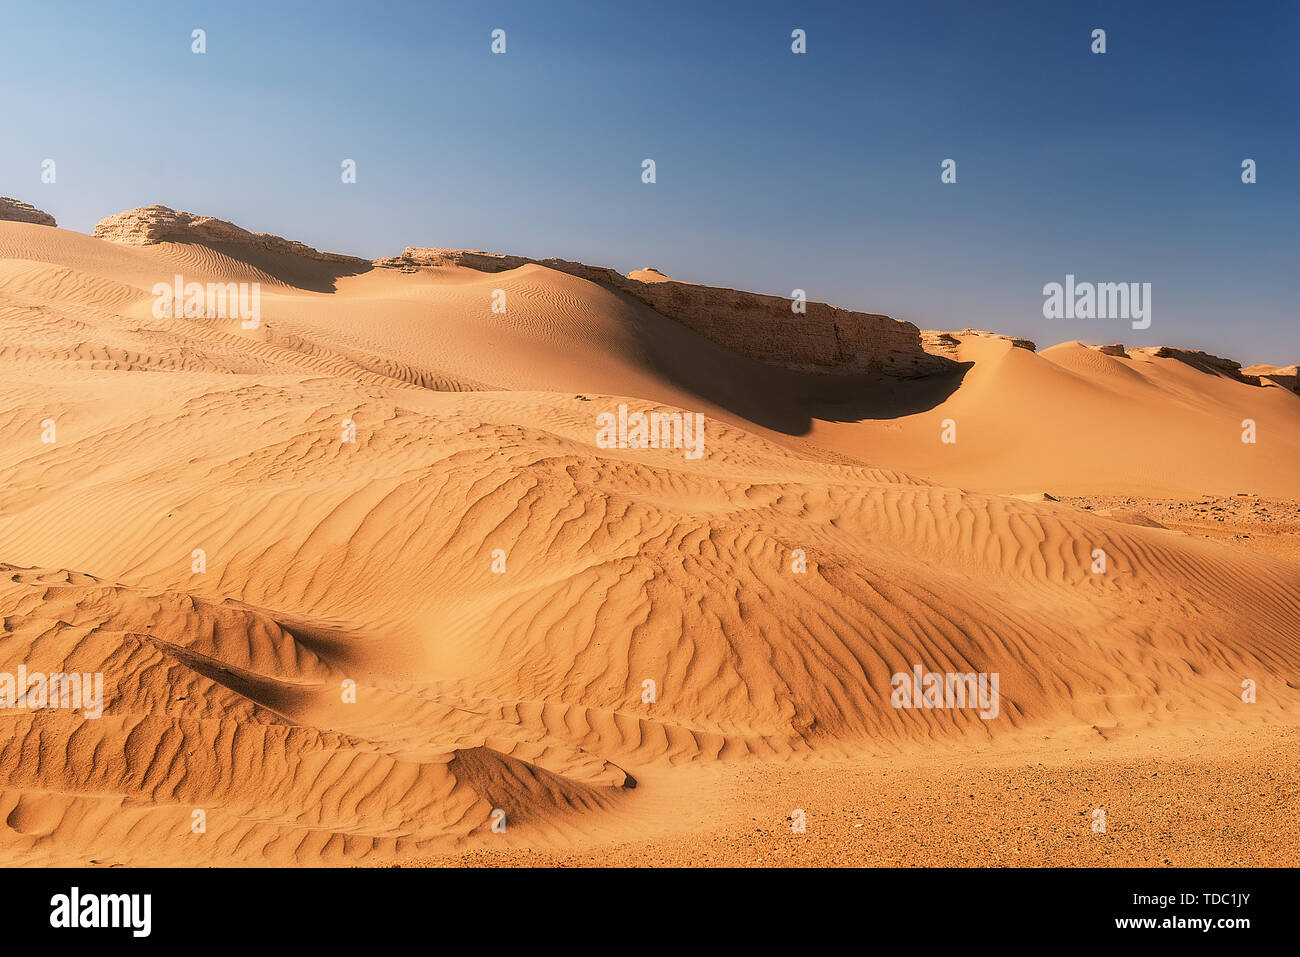 Desert sand sand dunes dry wasteland dry no one is lonely hot adventure adventure heat and sandy thirst. Hills and lonely tourism with camels and footprints outdoors Stock Photo